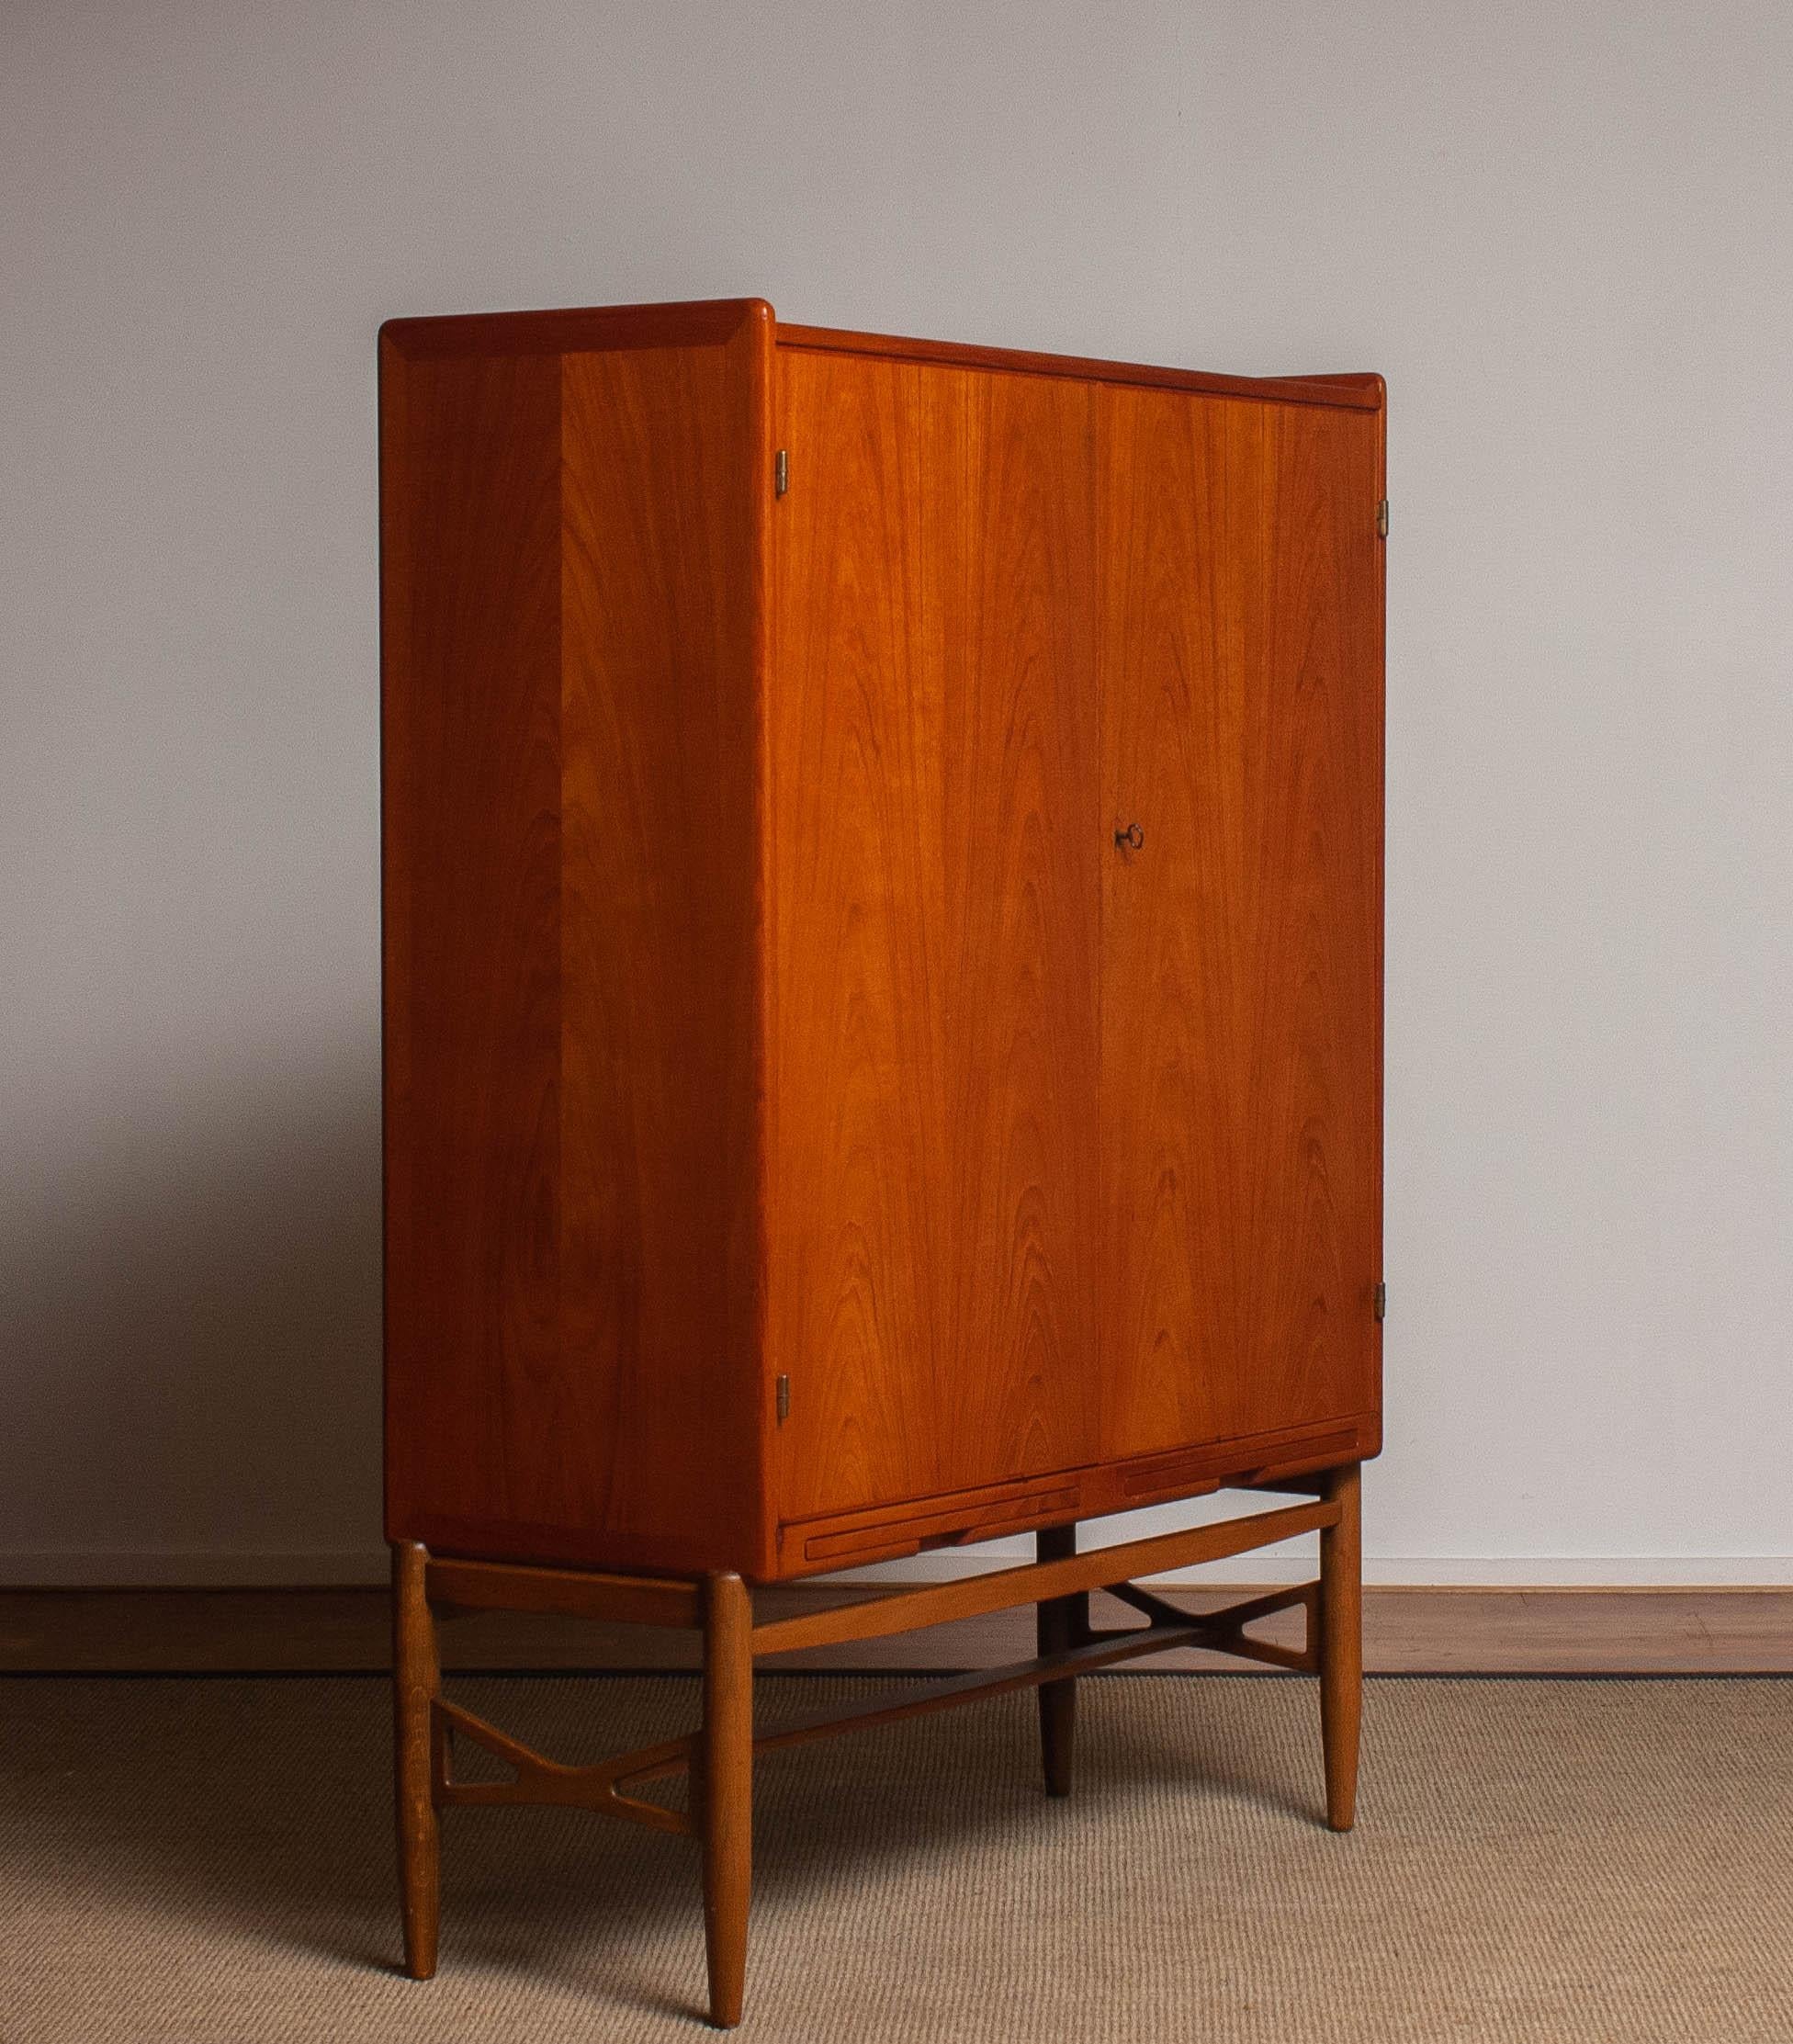 Beautiful and rare house keepers / storage cabinet in teak on a oak stand attributed to Westbergs Möbler in Sweden.
This cabinet has got two drawing blades underneath the cabinet to support. Inside there are two adjustable shelfs for storage and